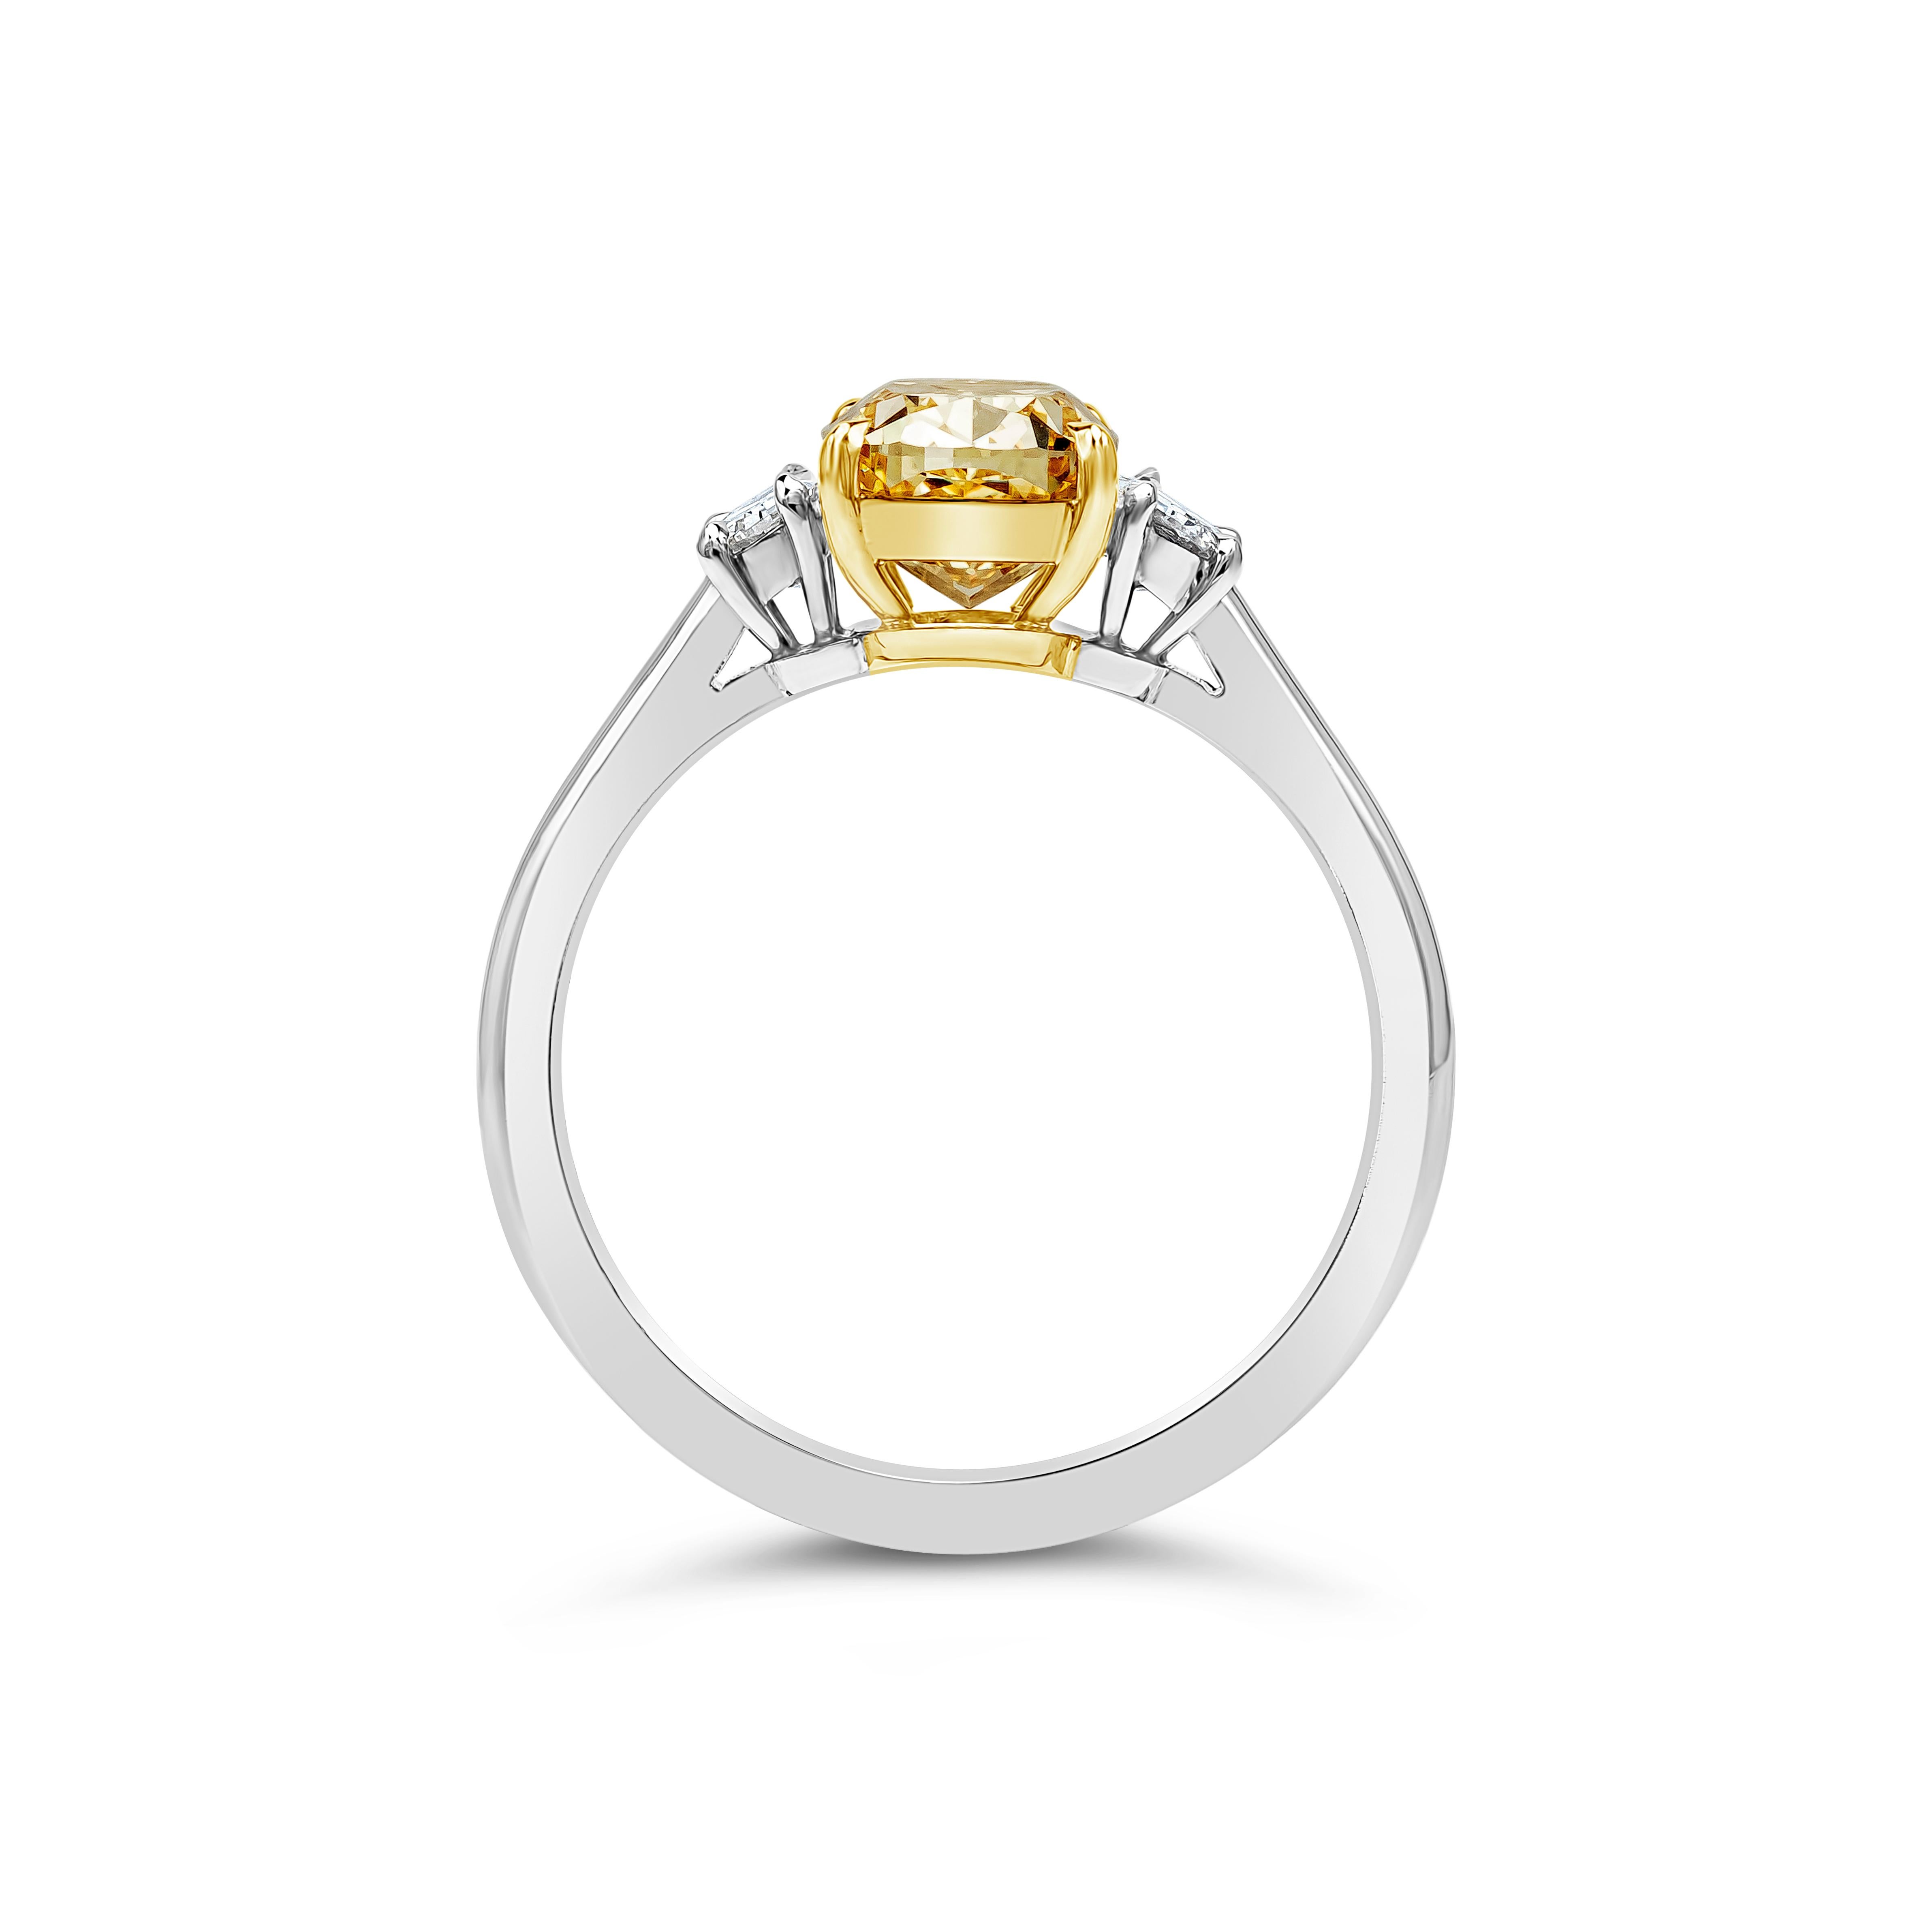 Contemporary 2.03 Carats Fancy Intense Yellow Diamond Three-Stone Engagement Ring For Sale